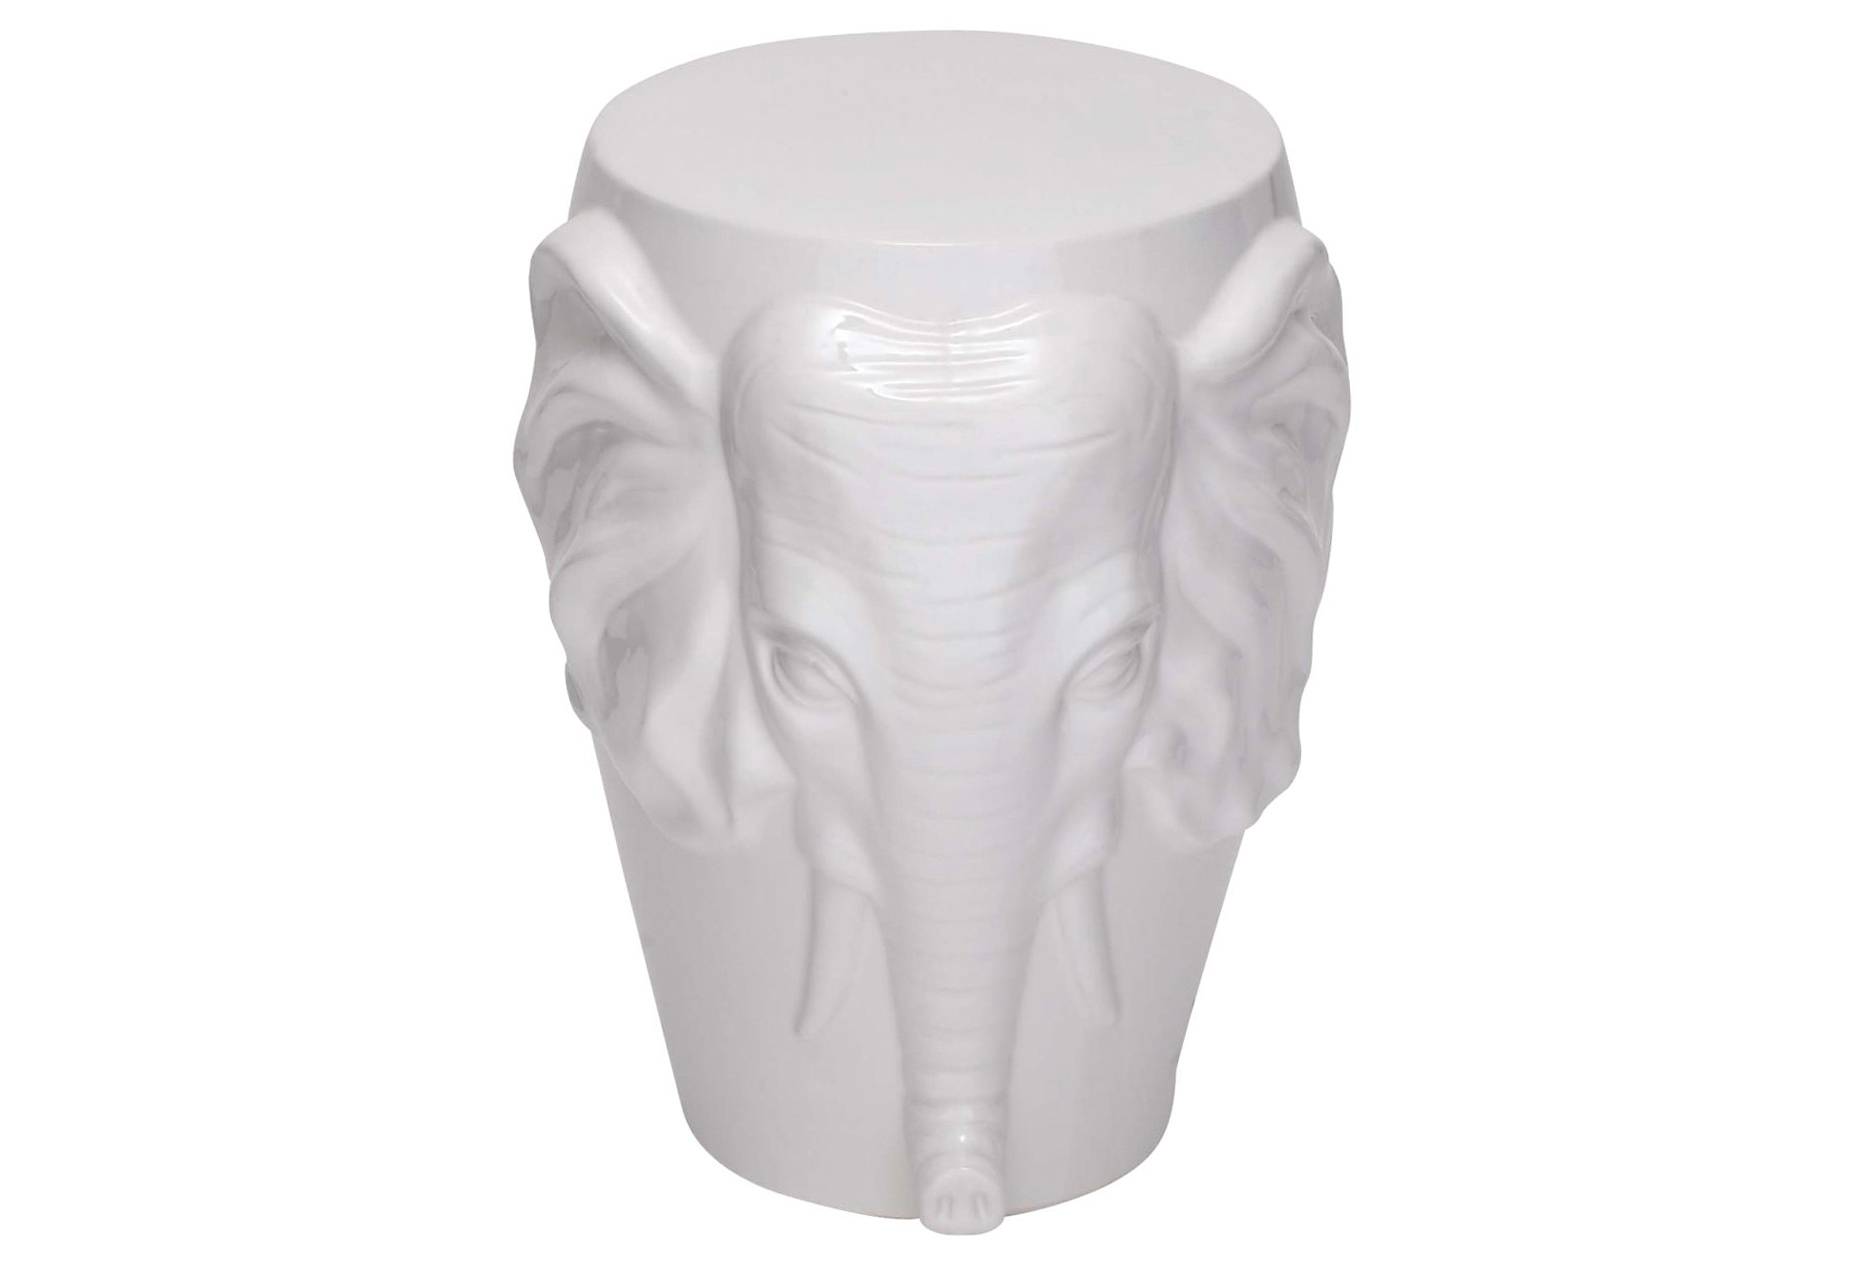 White ceramic elephant stool from Living Spaces